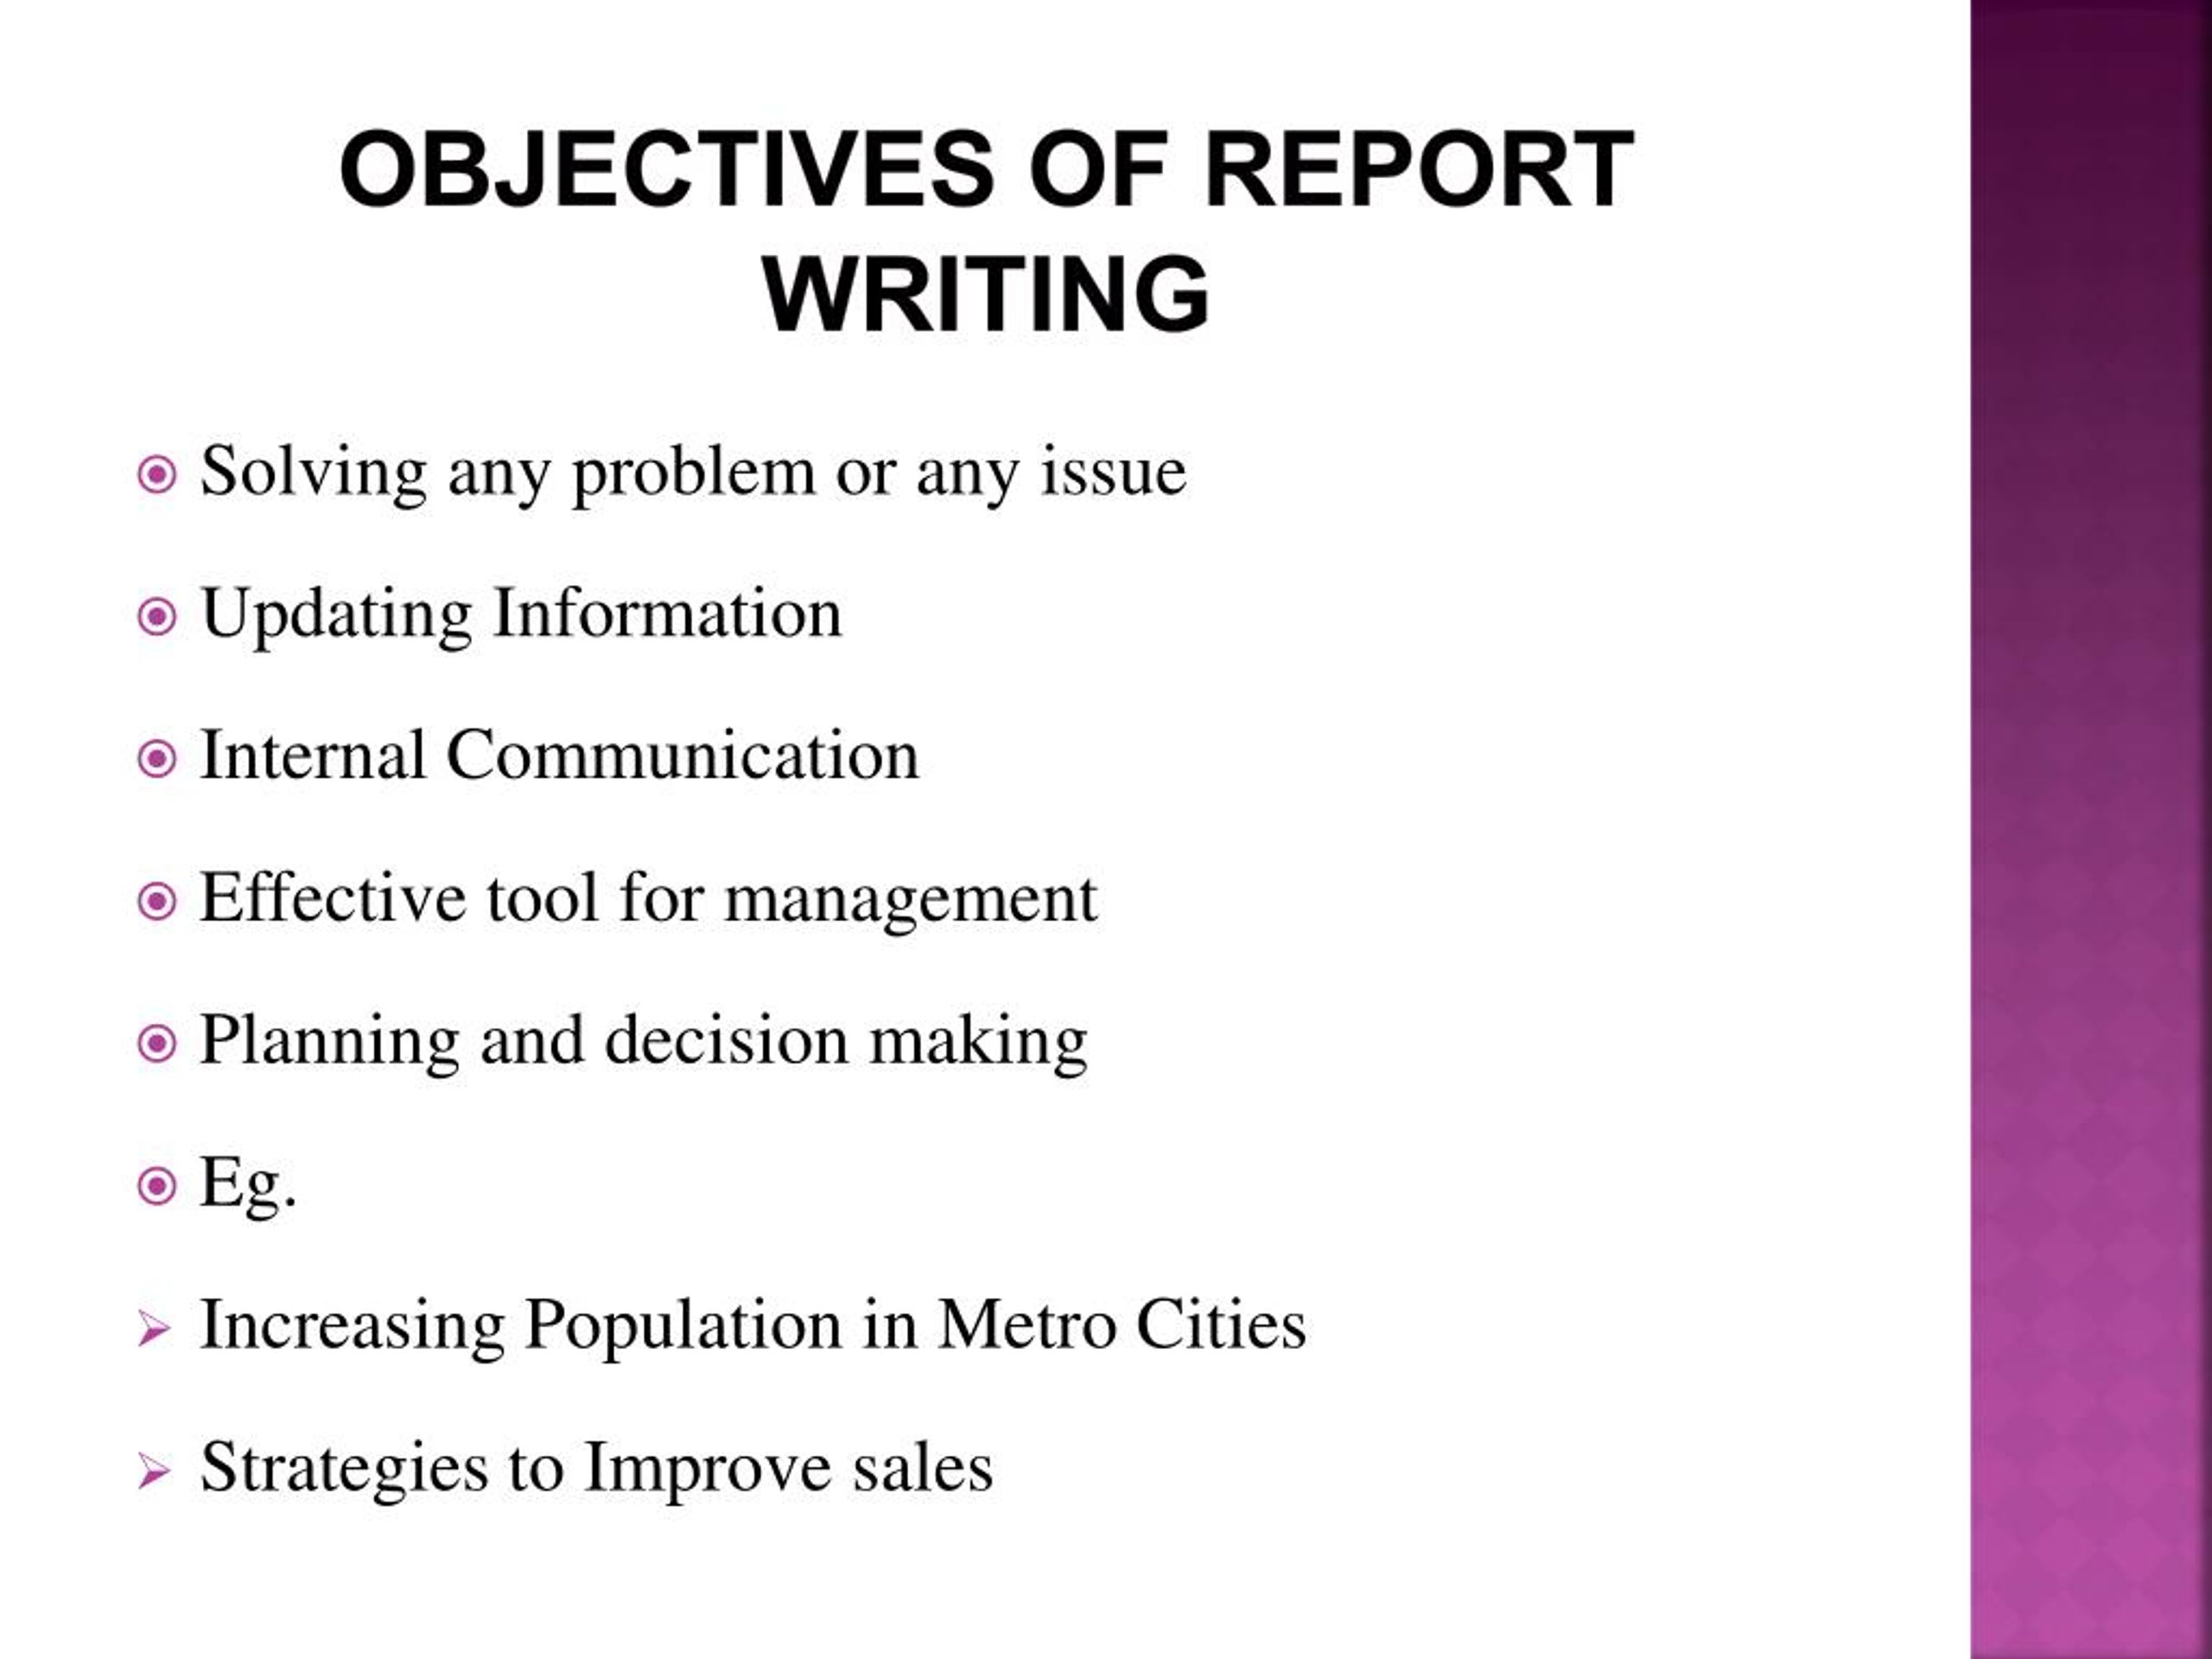 four types of report writing